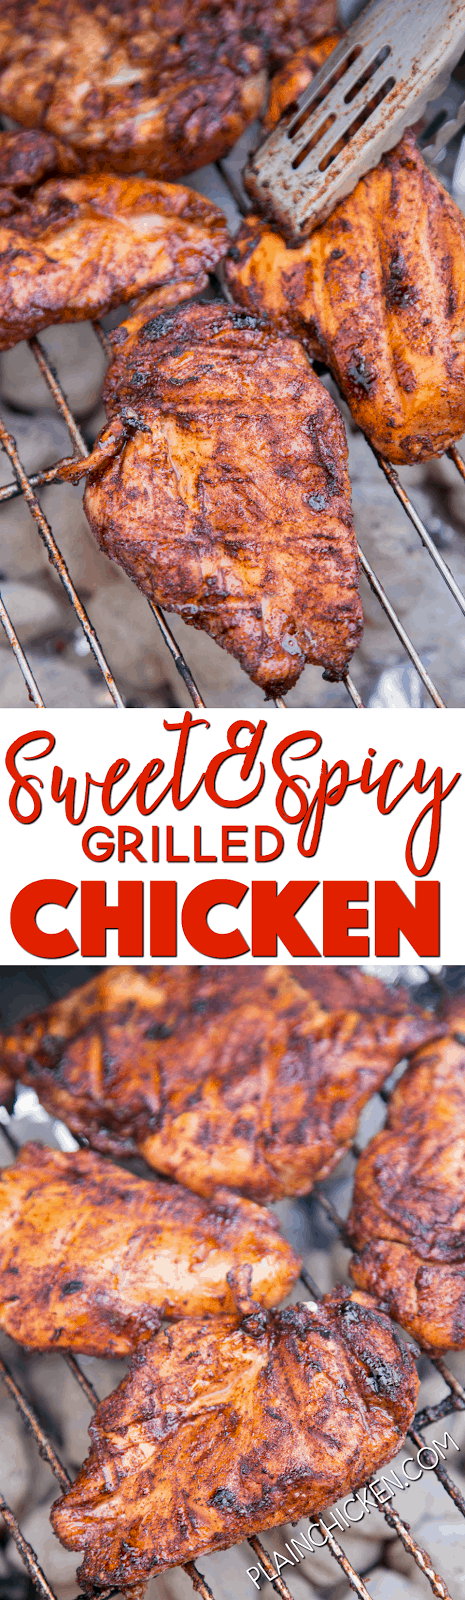 Sweet and Spicy Grilled Chicken - CRAZY good!! Chicken marinated in an easy dry rub and grilled. Ready for the grill in 30 minutes! Brown sugar, chili powder, garlic powder, seasoned salt and chicken. We LOVE this chicken! SO much flavor!!! Great in wraps and on top of a salad too!! One of our favorite chicken recipes.